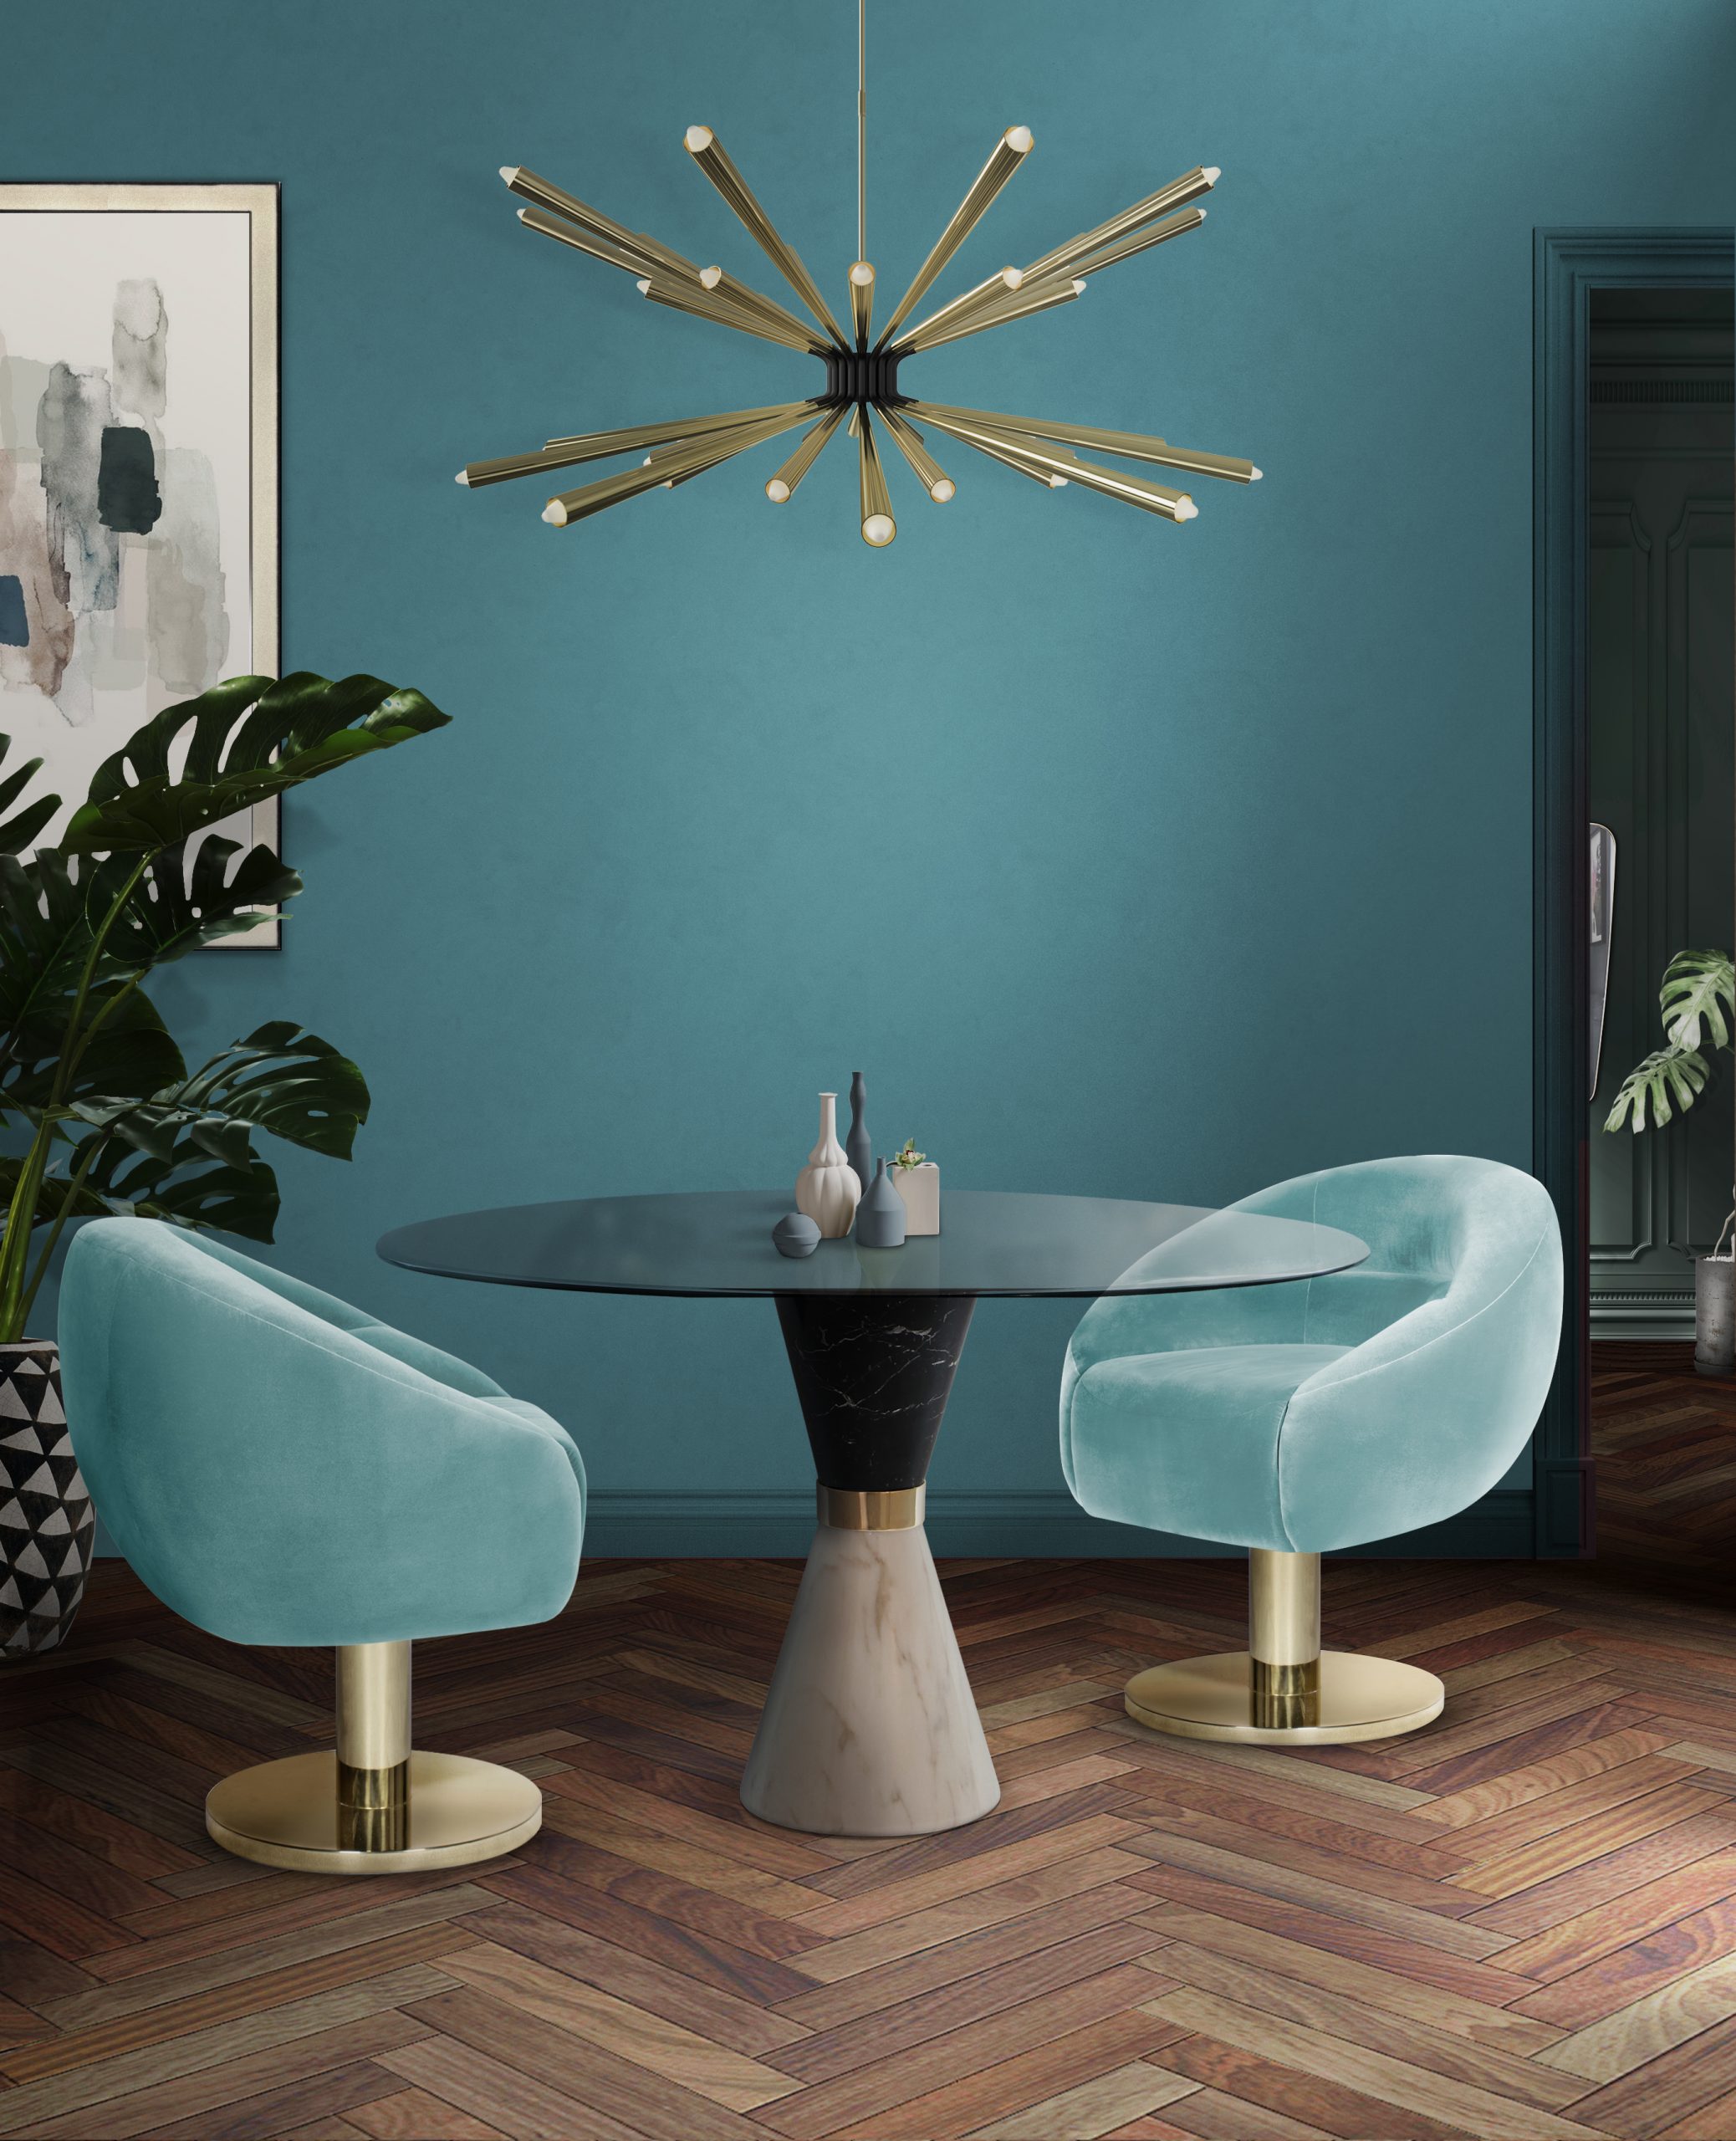 Let These Suspension Lamps be the Spotlight of Your Dining Table!